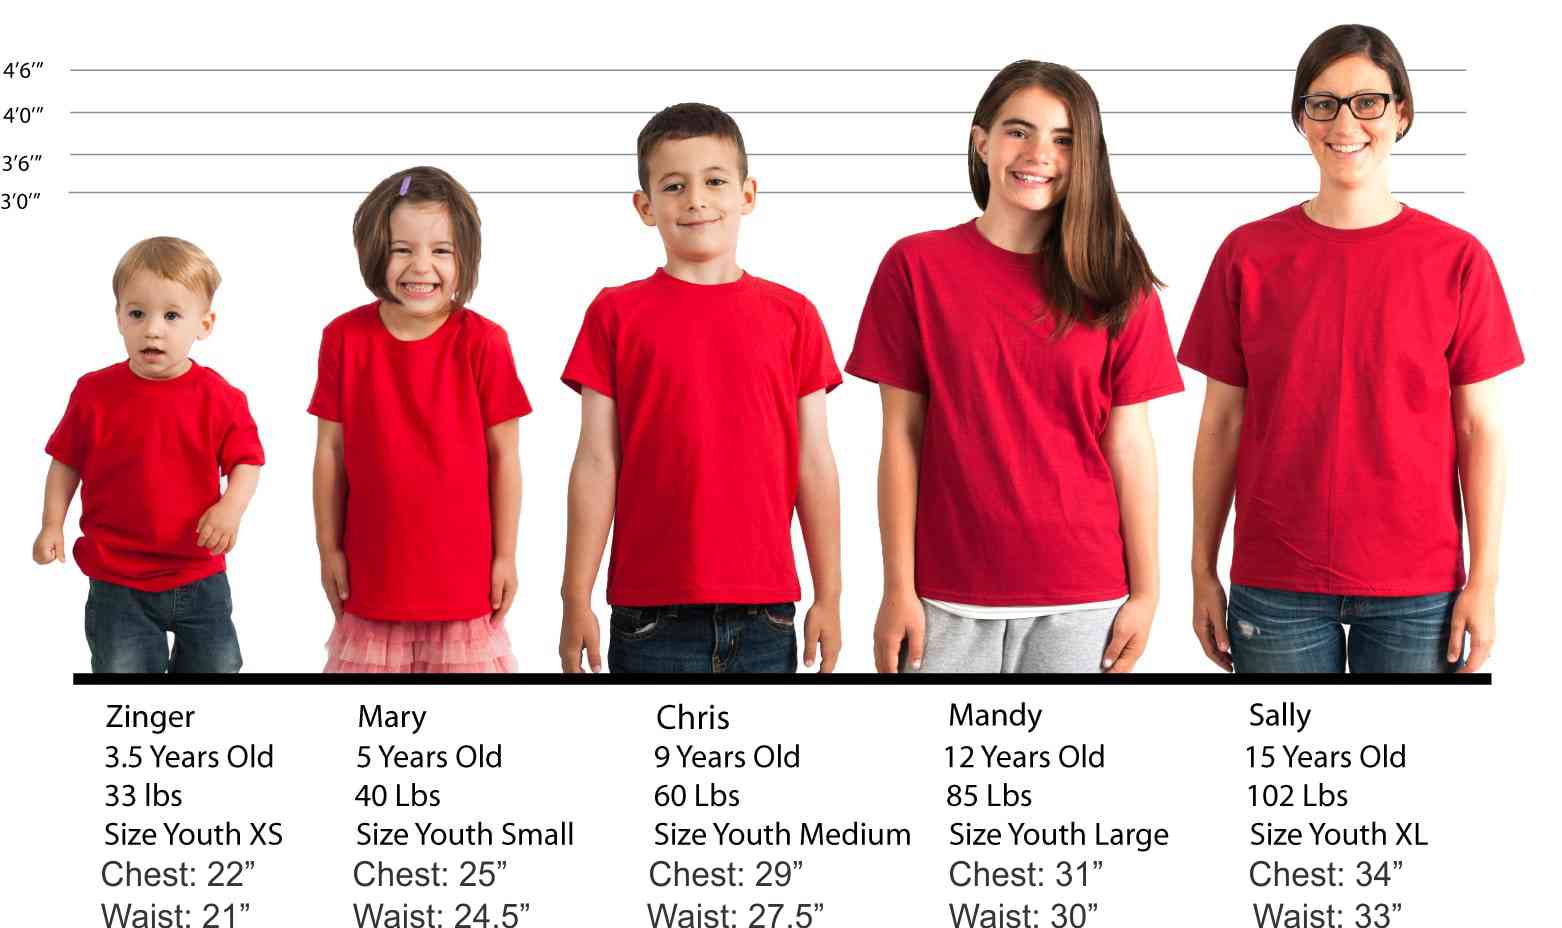 Youth xs t shirt size: Youth Apparel Size Chart | Tactics